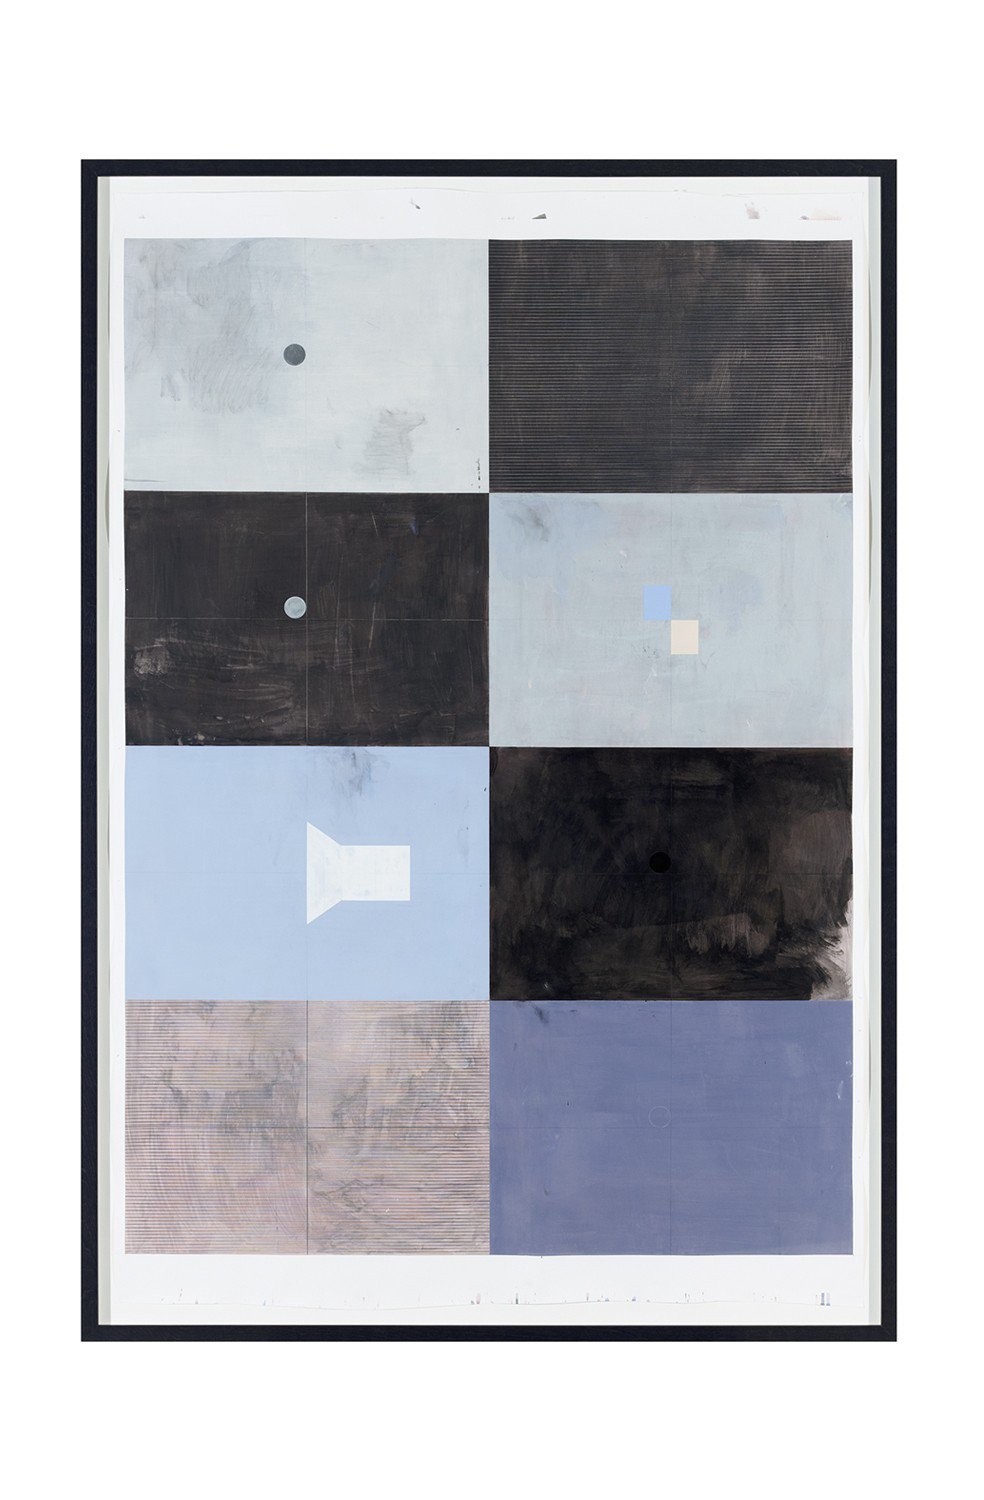 Nick OberthalerUntitled (Eight proposals for a landscape), 2012Ink, gouache and crayon on paper165 x 110 cm